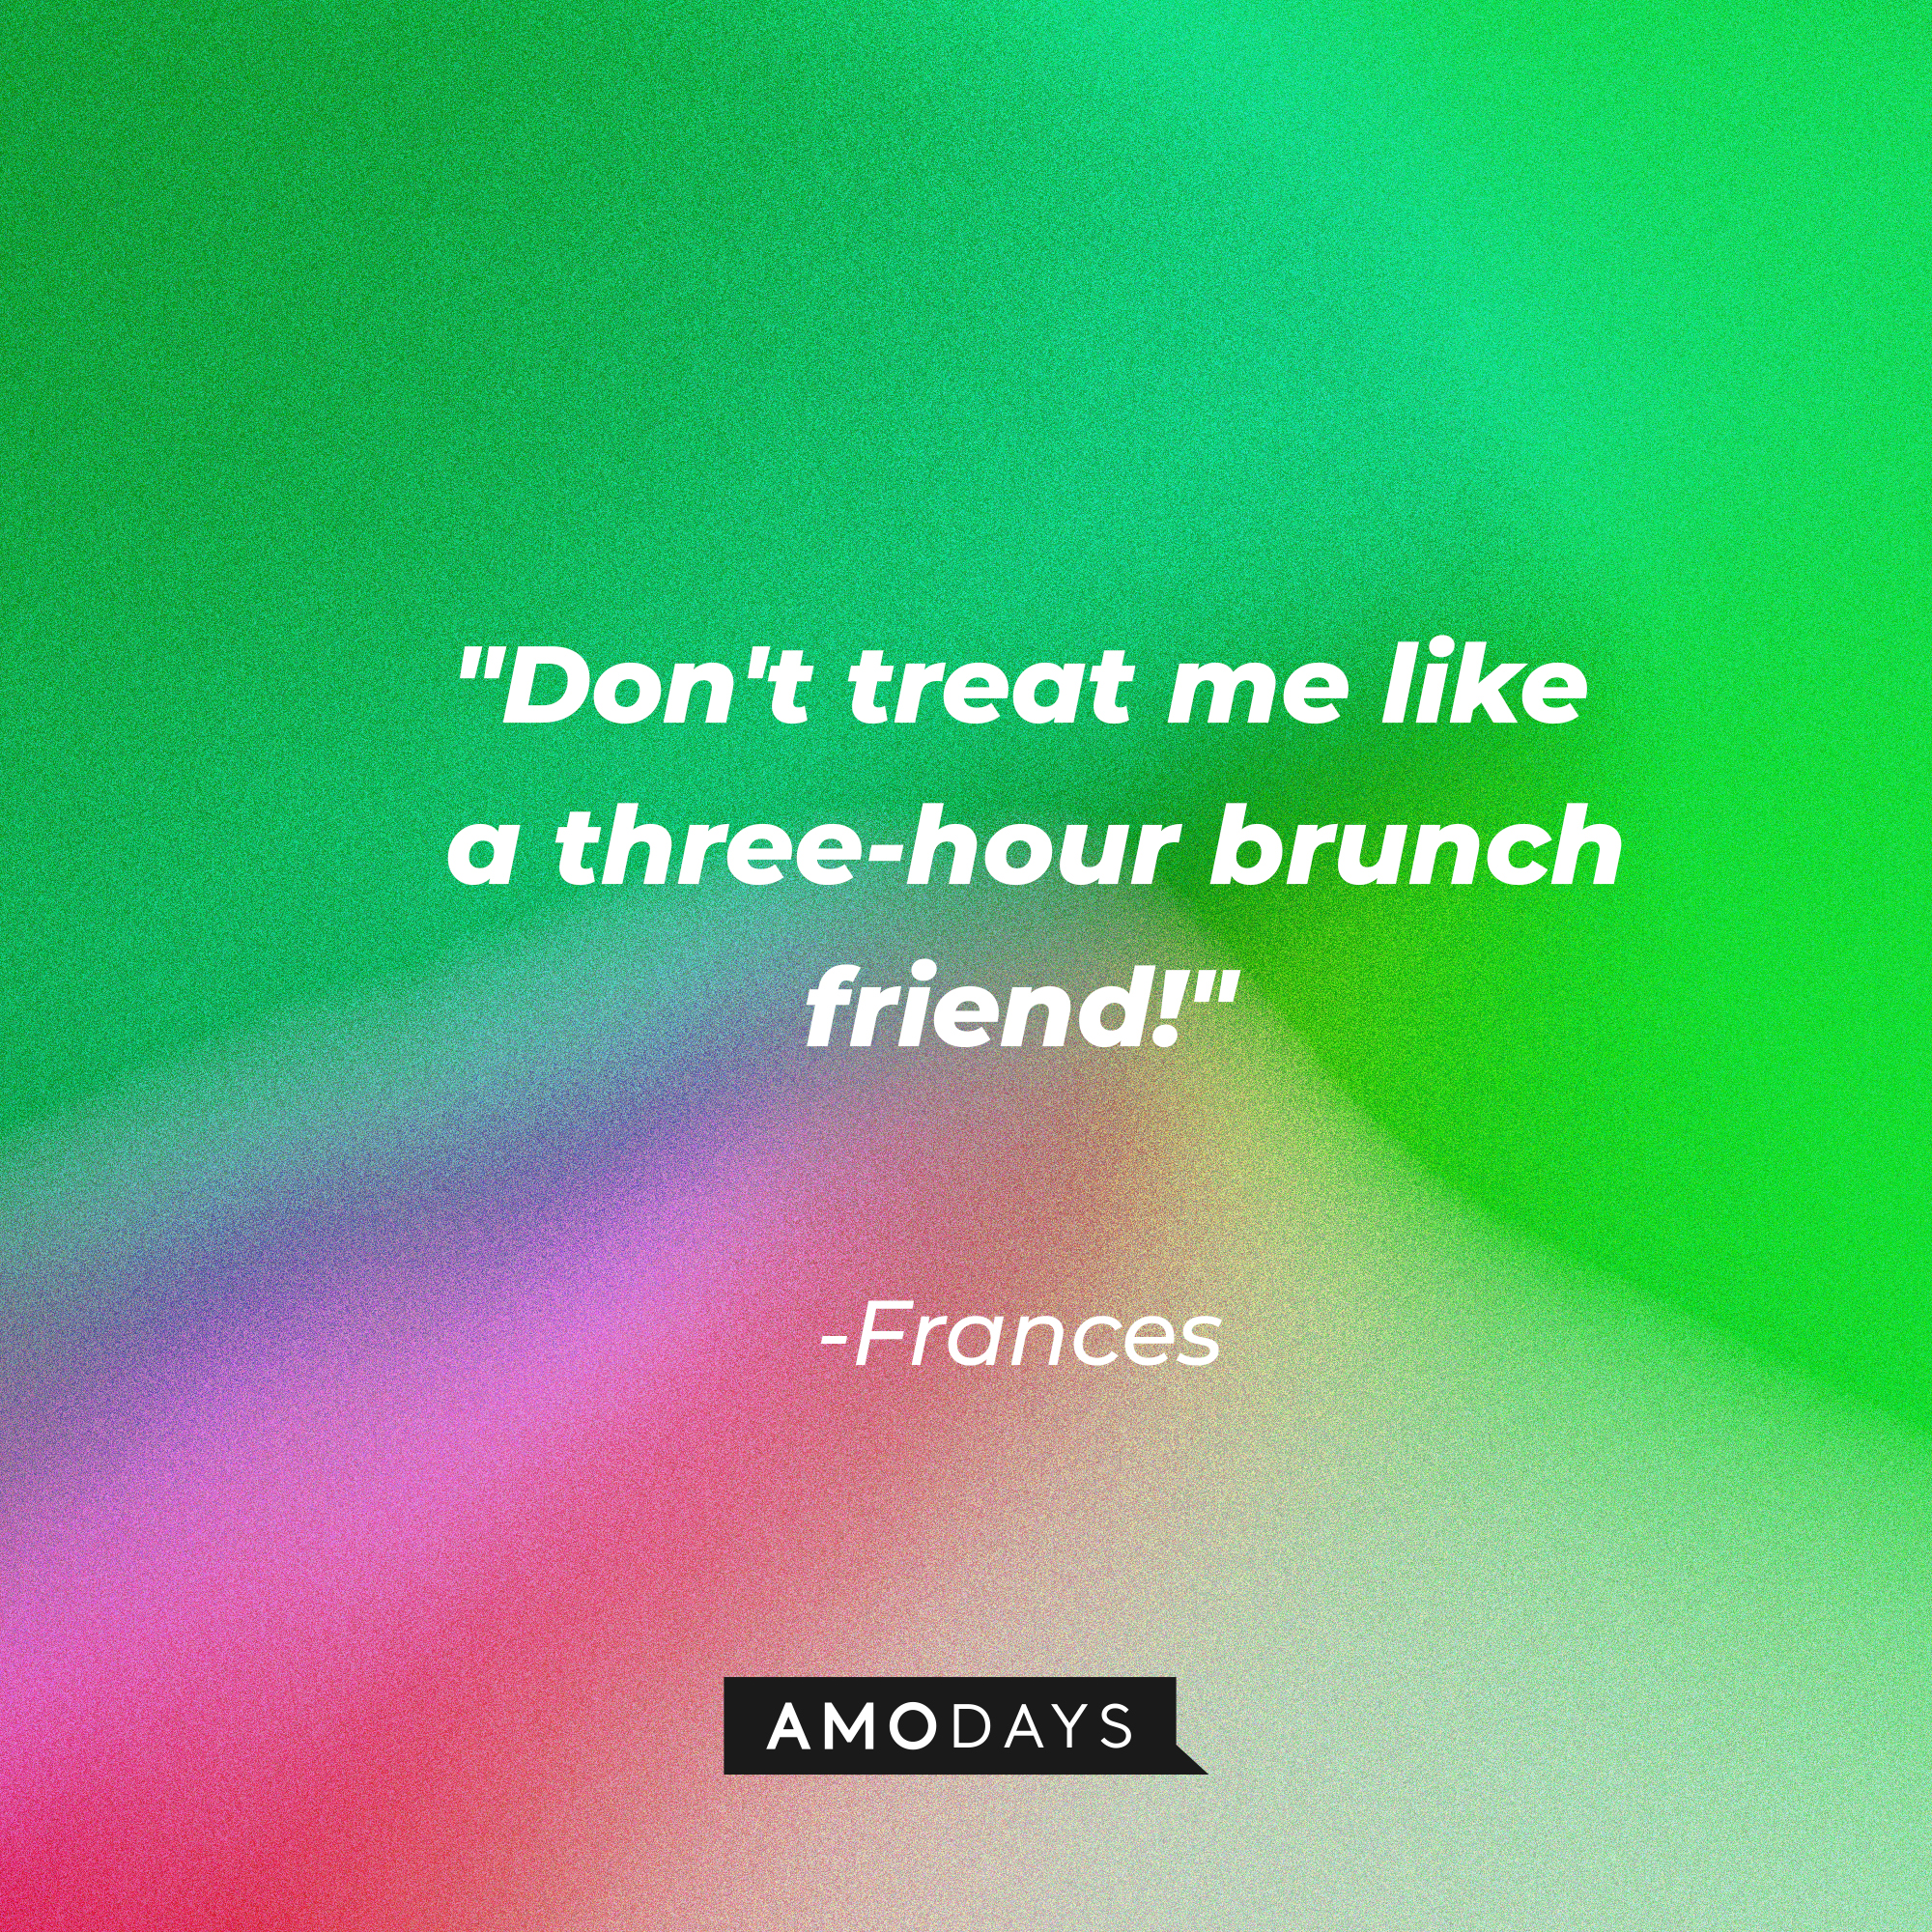 Frances' quote: "Don't treat me like a three-hour brunch friend!" | Source: AmoDays